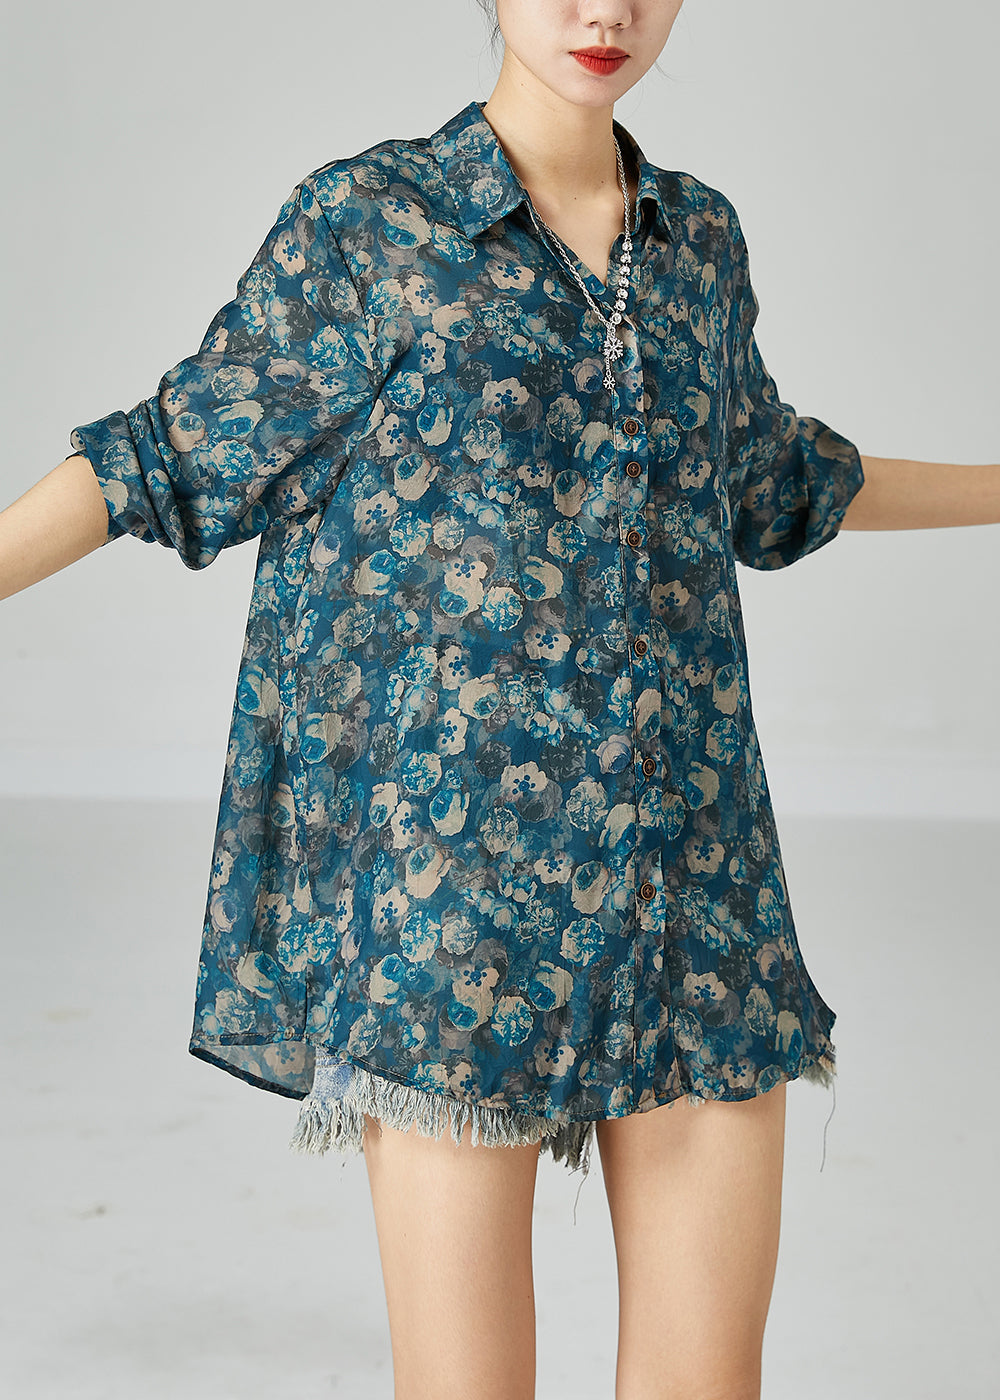 Unique Blue Peter Pan Collar Oversized Print Cotton Shirts Spring LY2444